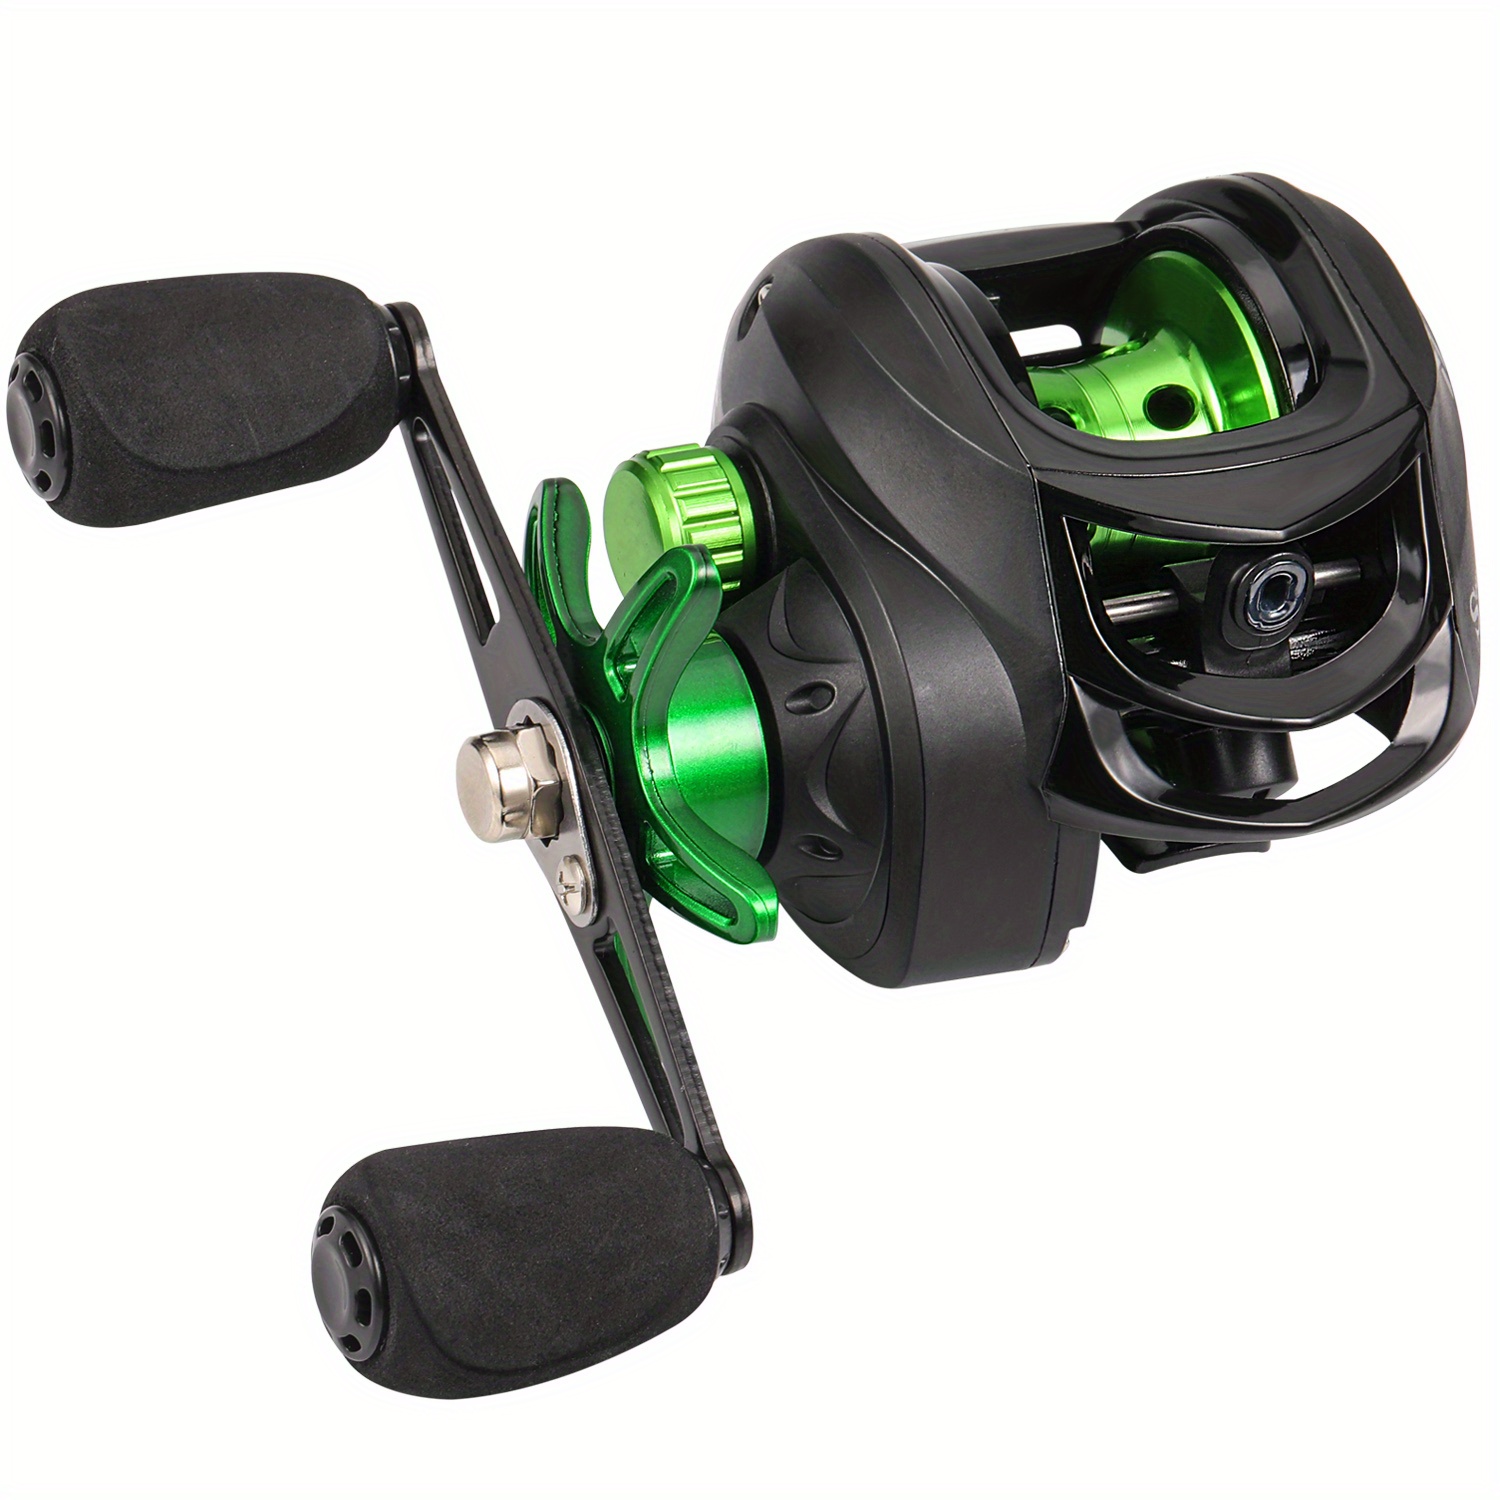 Green Bait Casting Reel, Stainless Steel Fishing Reel With Main Shaft  Magnetic Brake System & 7.2:1 Speed Ratio, For Freshwater Fishing